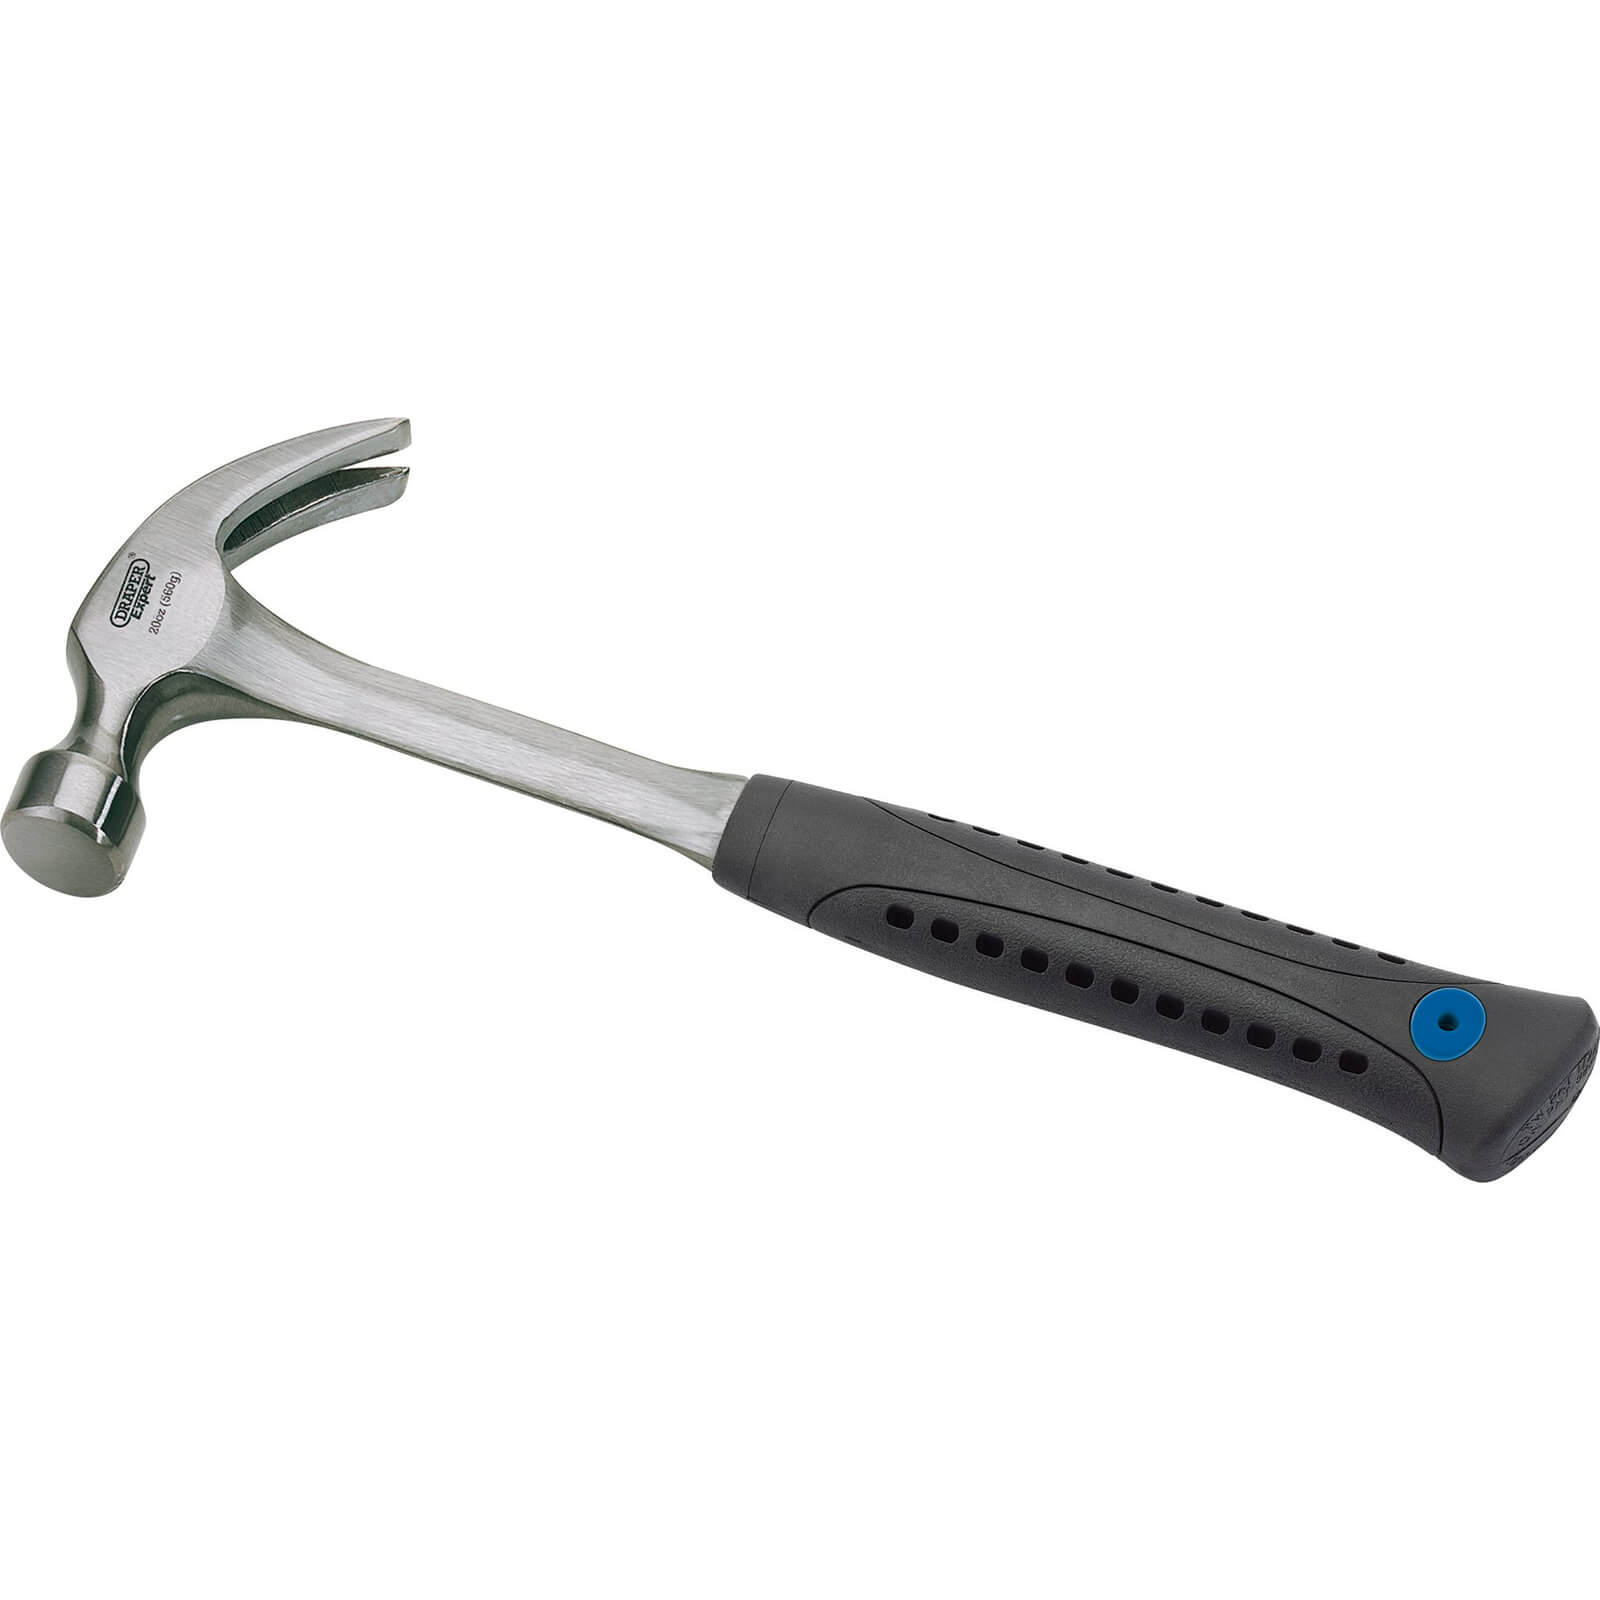 Image of Draper Expert Solid Forged Claw Hammer 560g